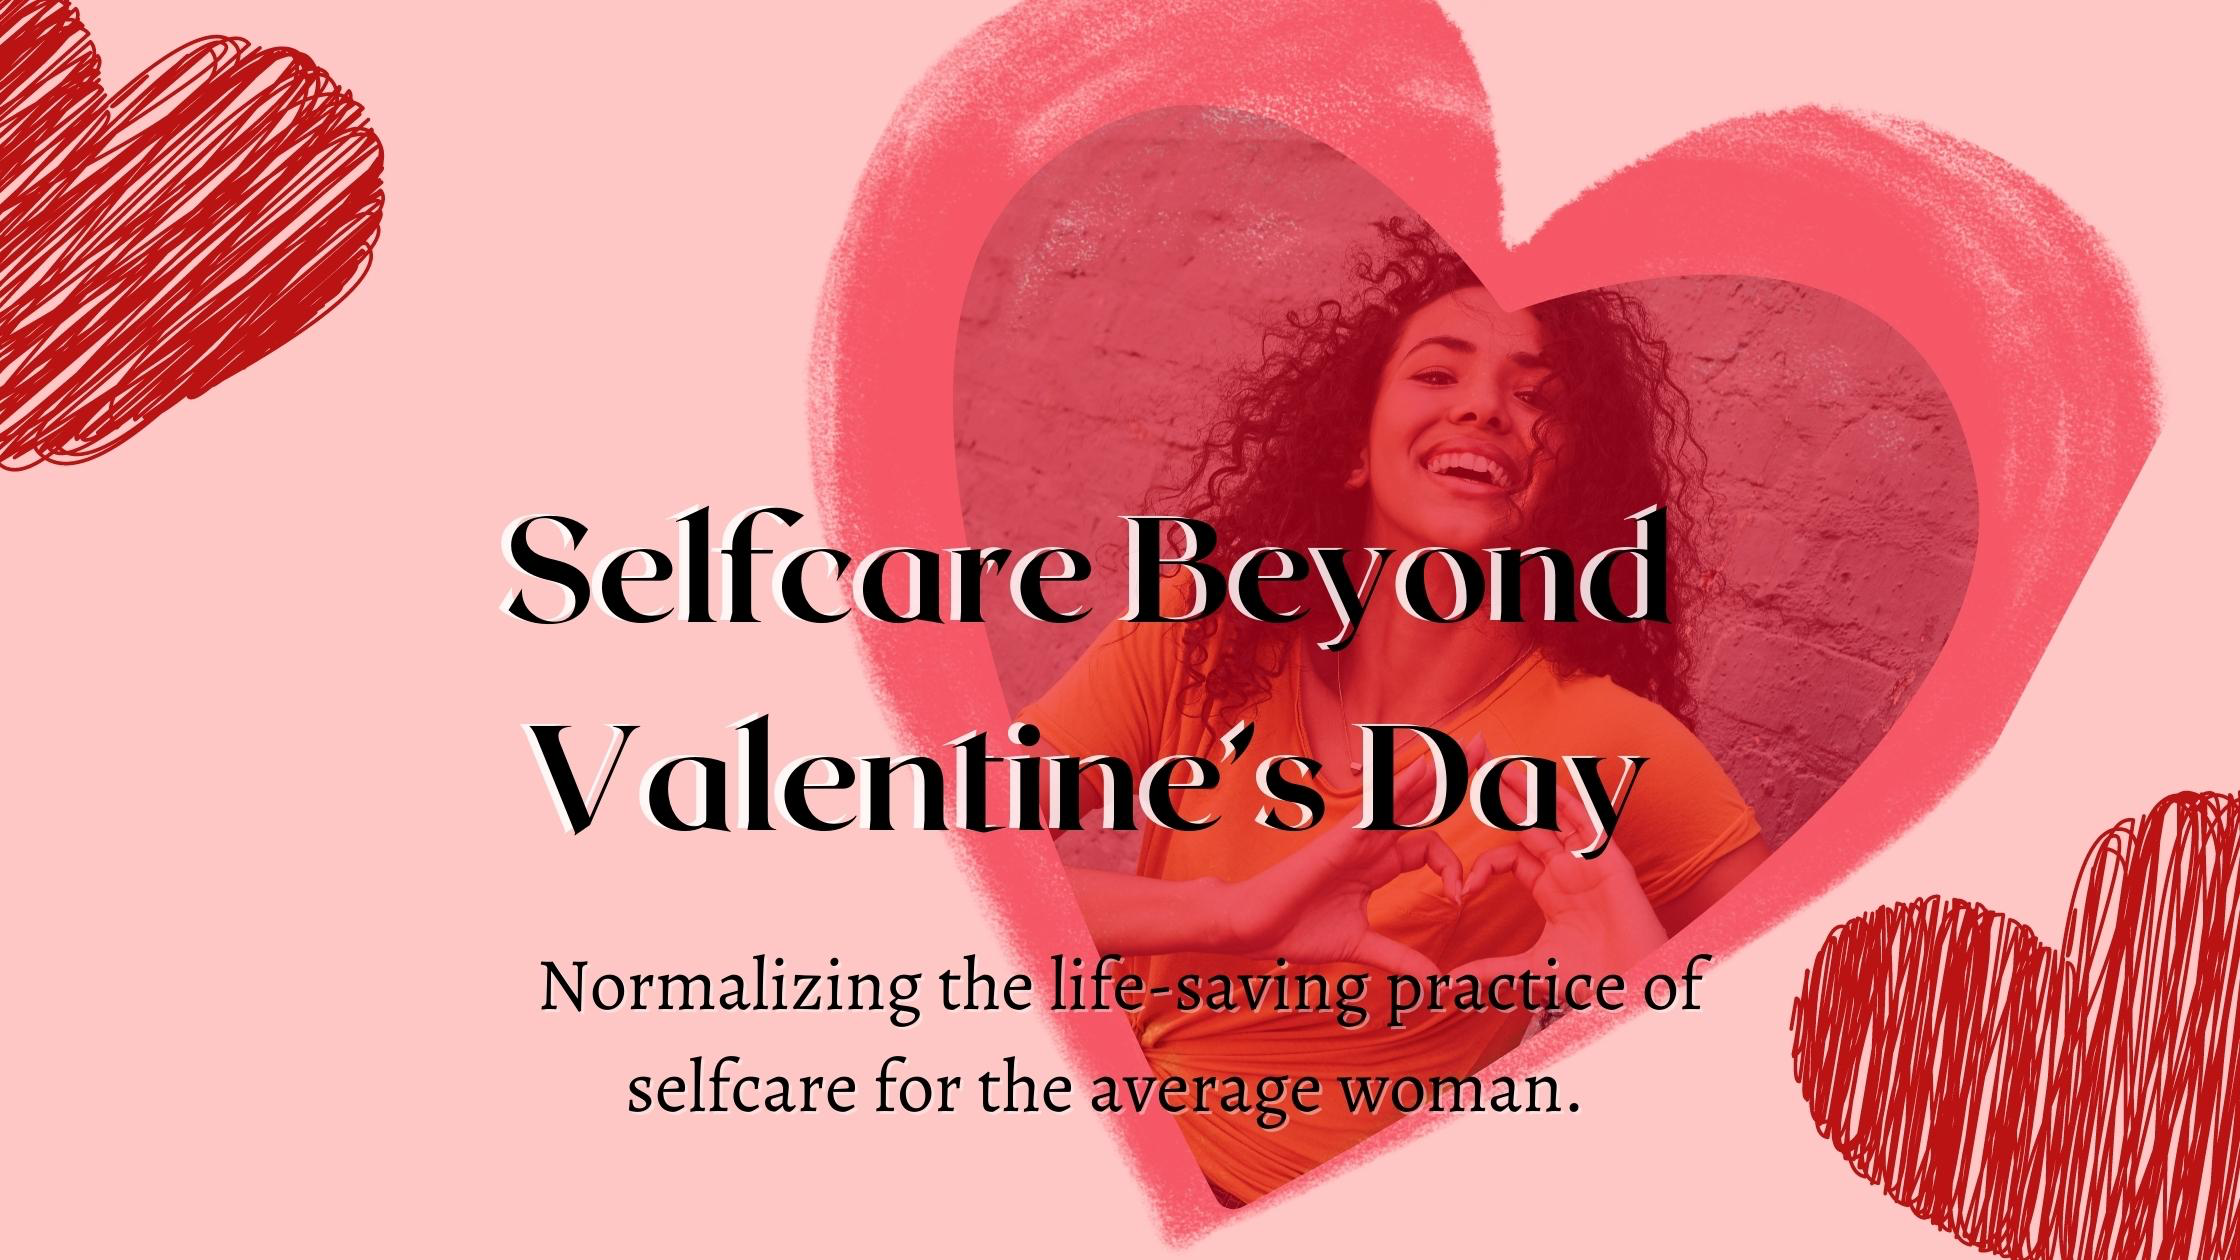 feature image for selfcare beyond Valentine’s Day post